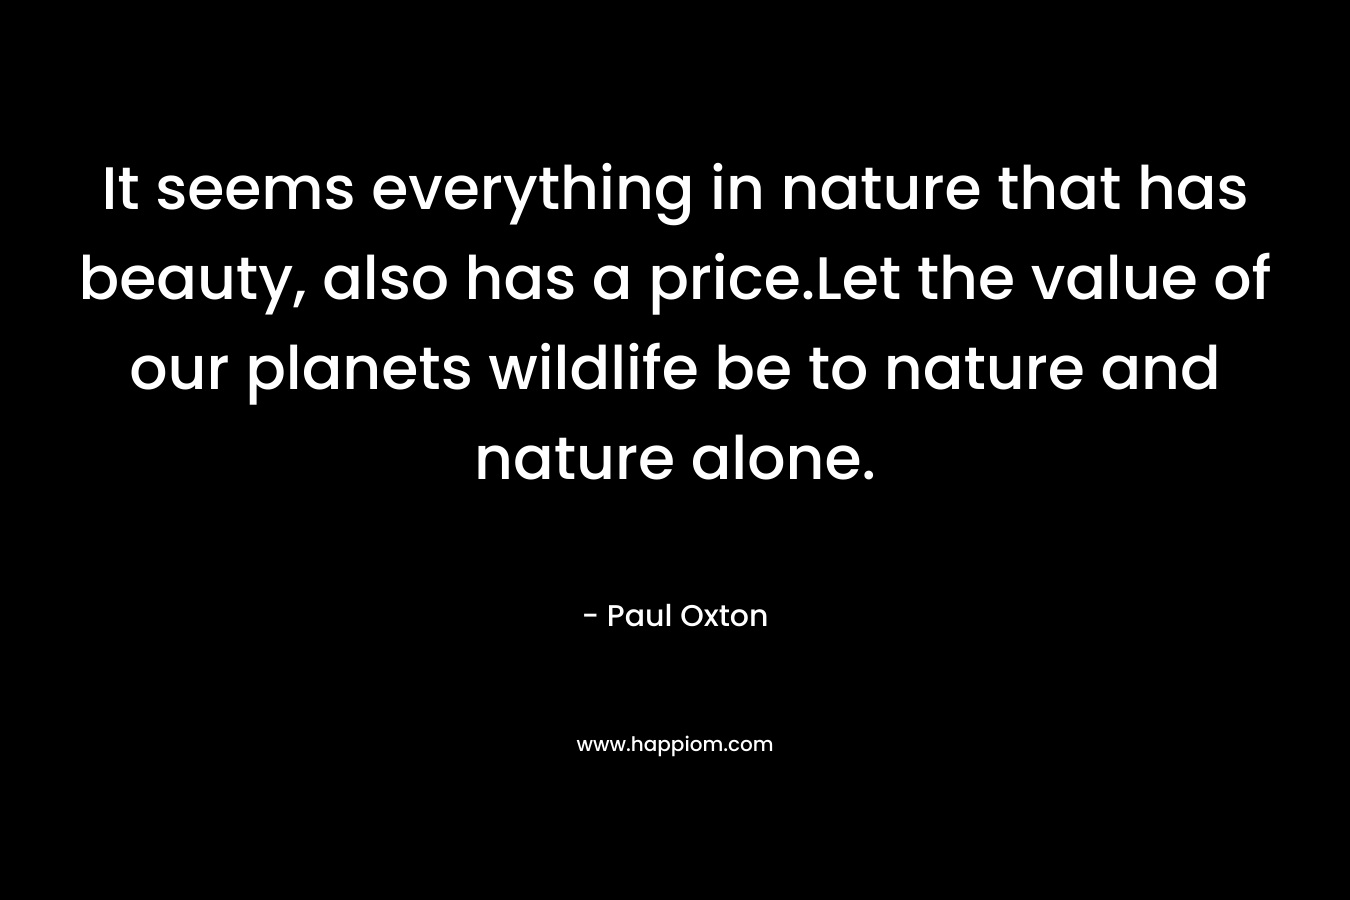 It seems everything in nature that has beauty, also has a price.Let the value of our planets wildlife be to nature and nature alone.